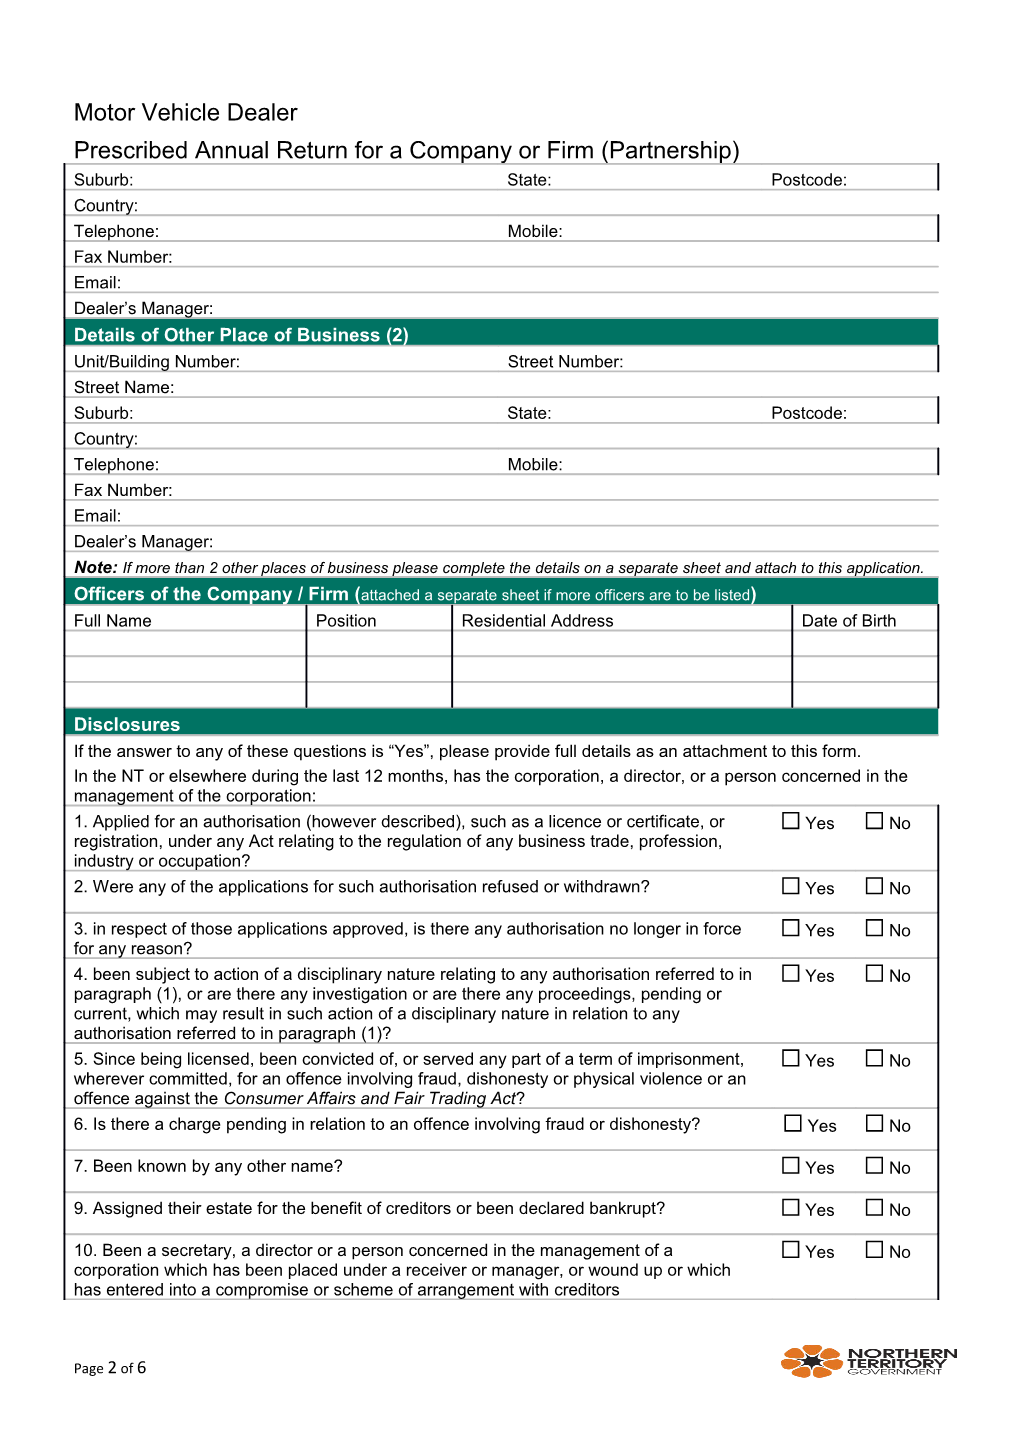 Application for Prescribed Annual Return (Firm)